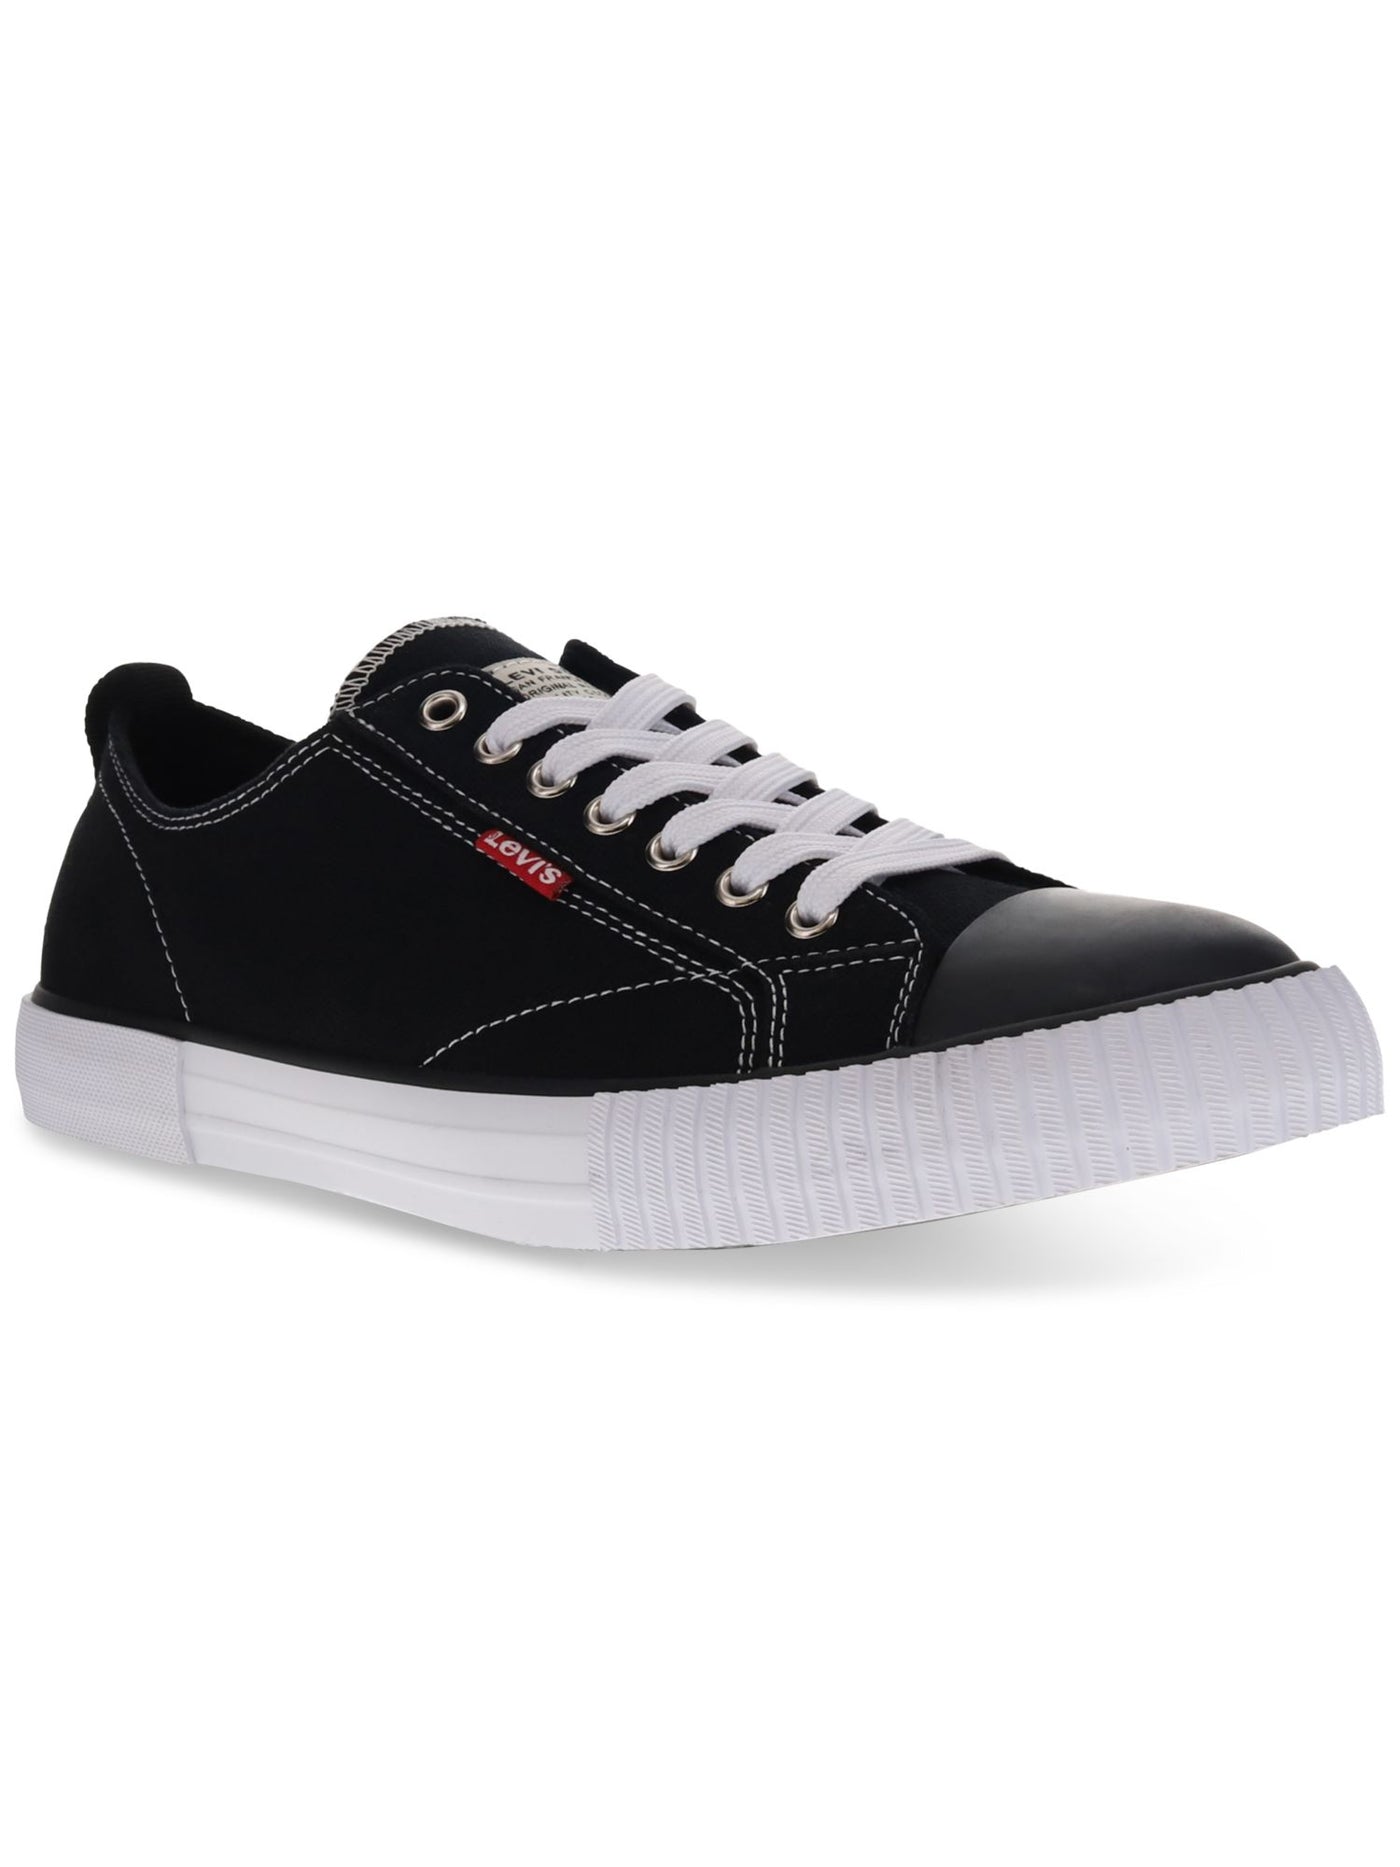 LEVI'S Mens Navy Removable Insole Cushioned Anikin Round Toe Lace-Up Sneakers Shoes 7